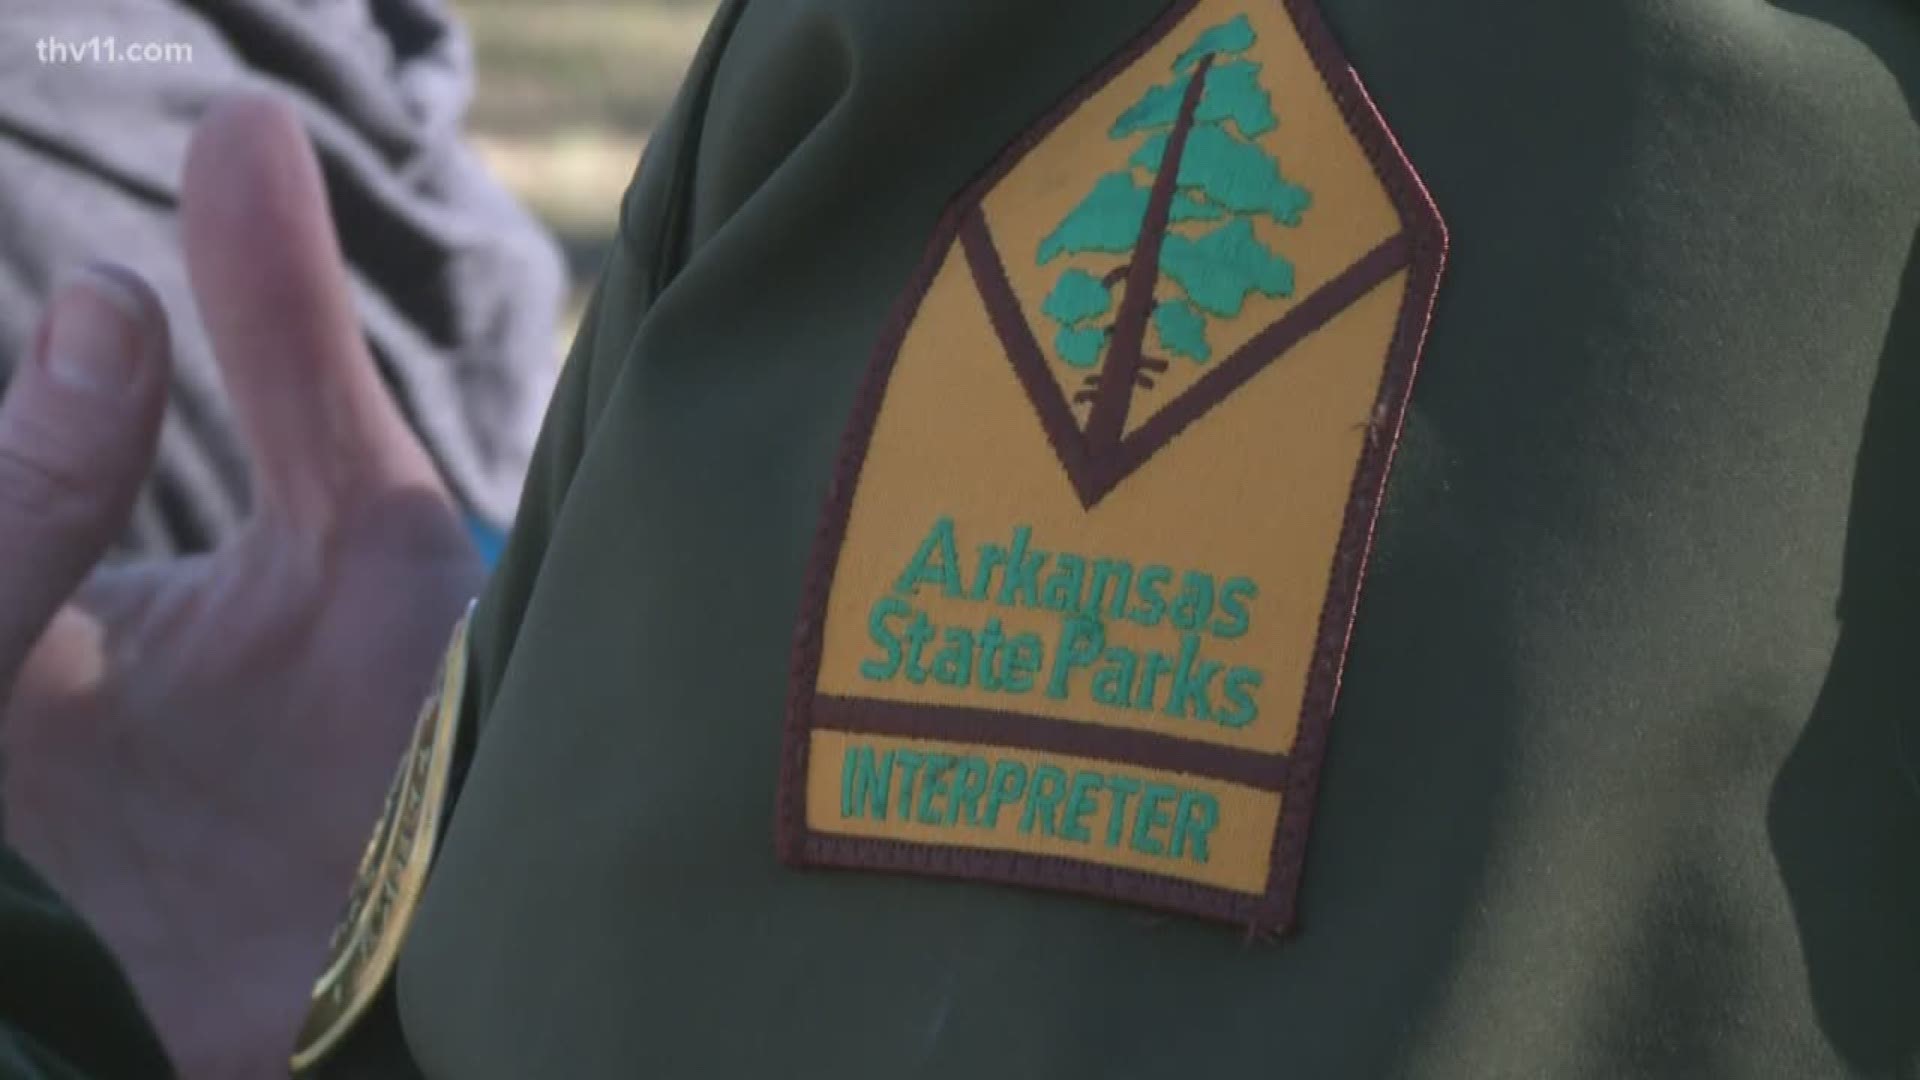 Park rangers around the state held their annual celebration.